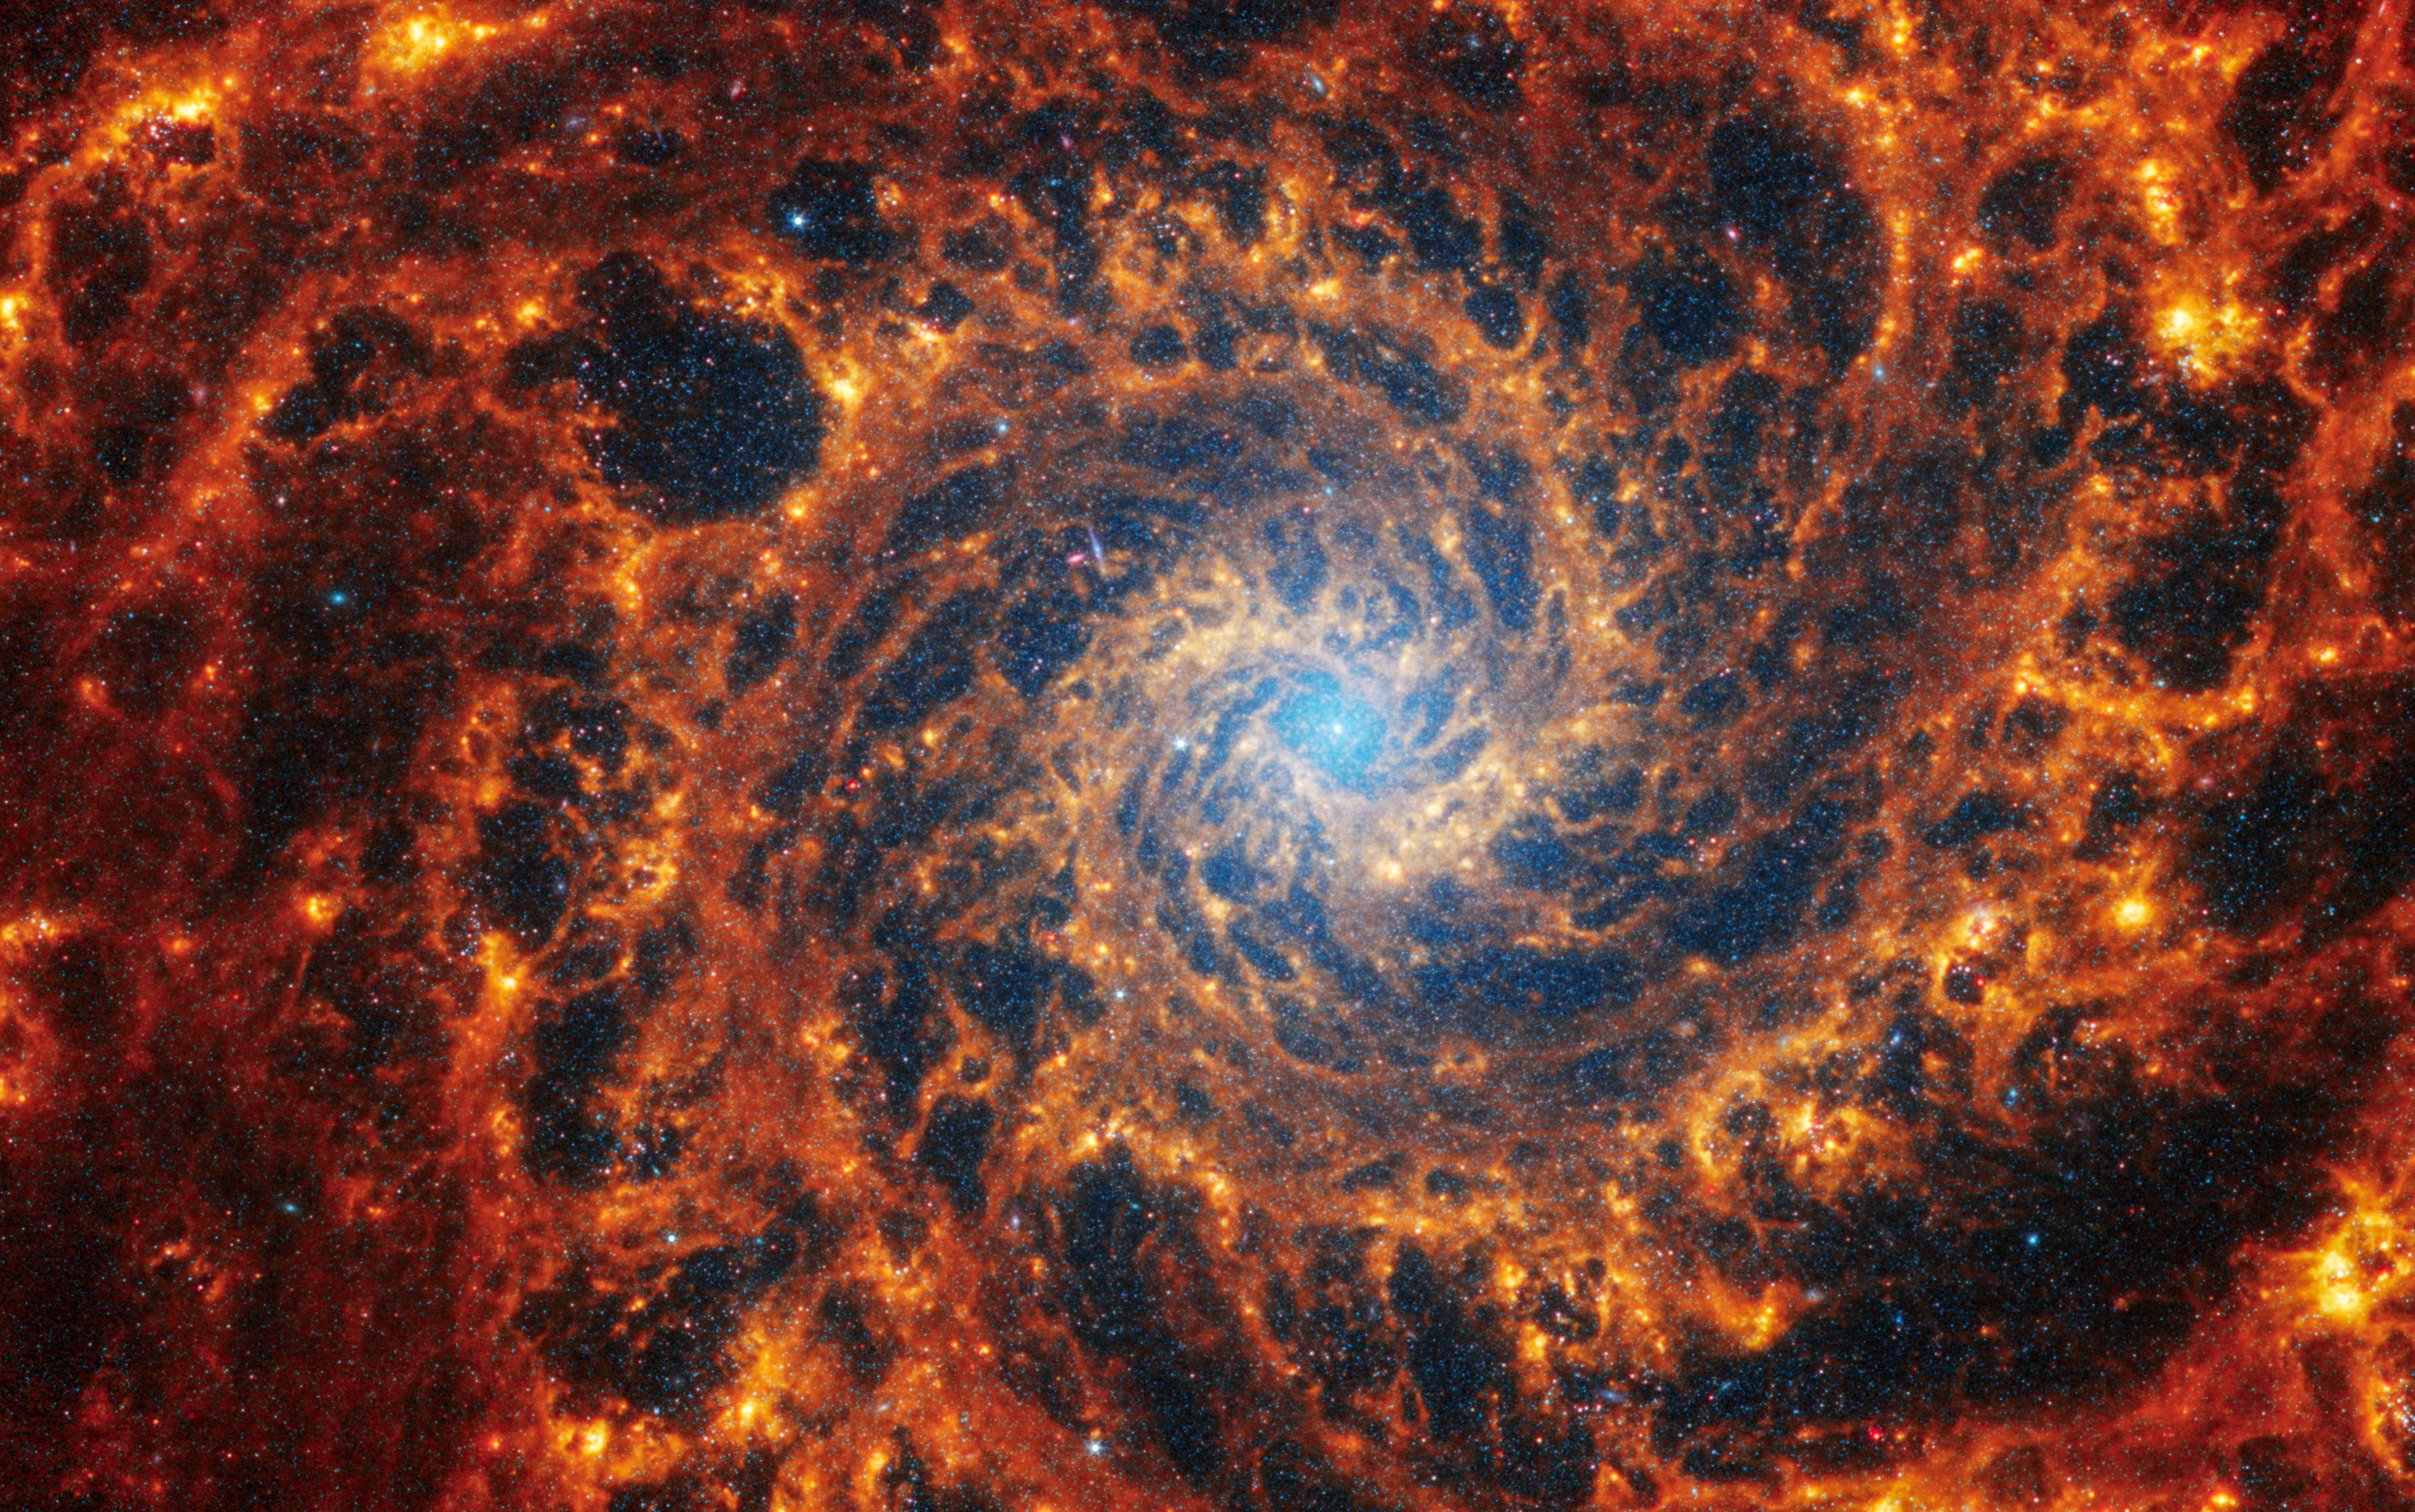 Spiral galaxy NGC 628, located 32 million light-years away from Earth, is seen in an image from the James Webb Space Telescope